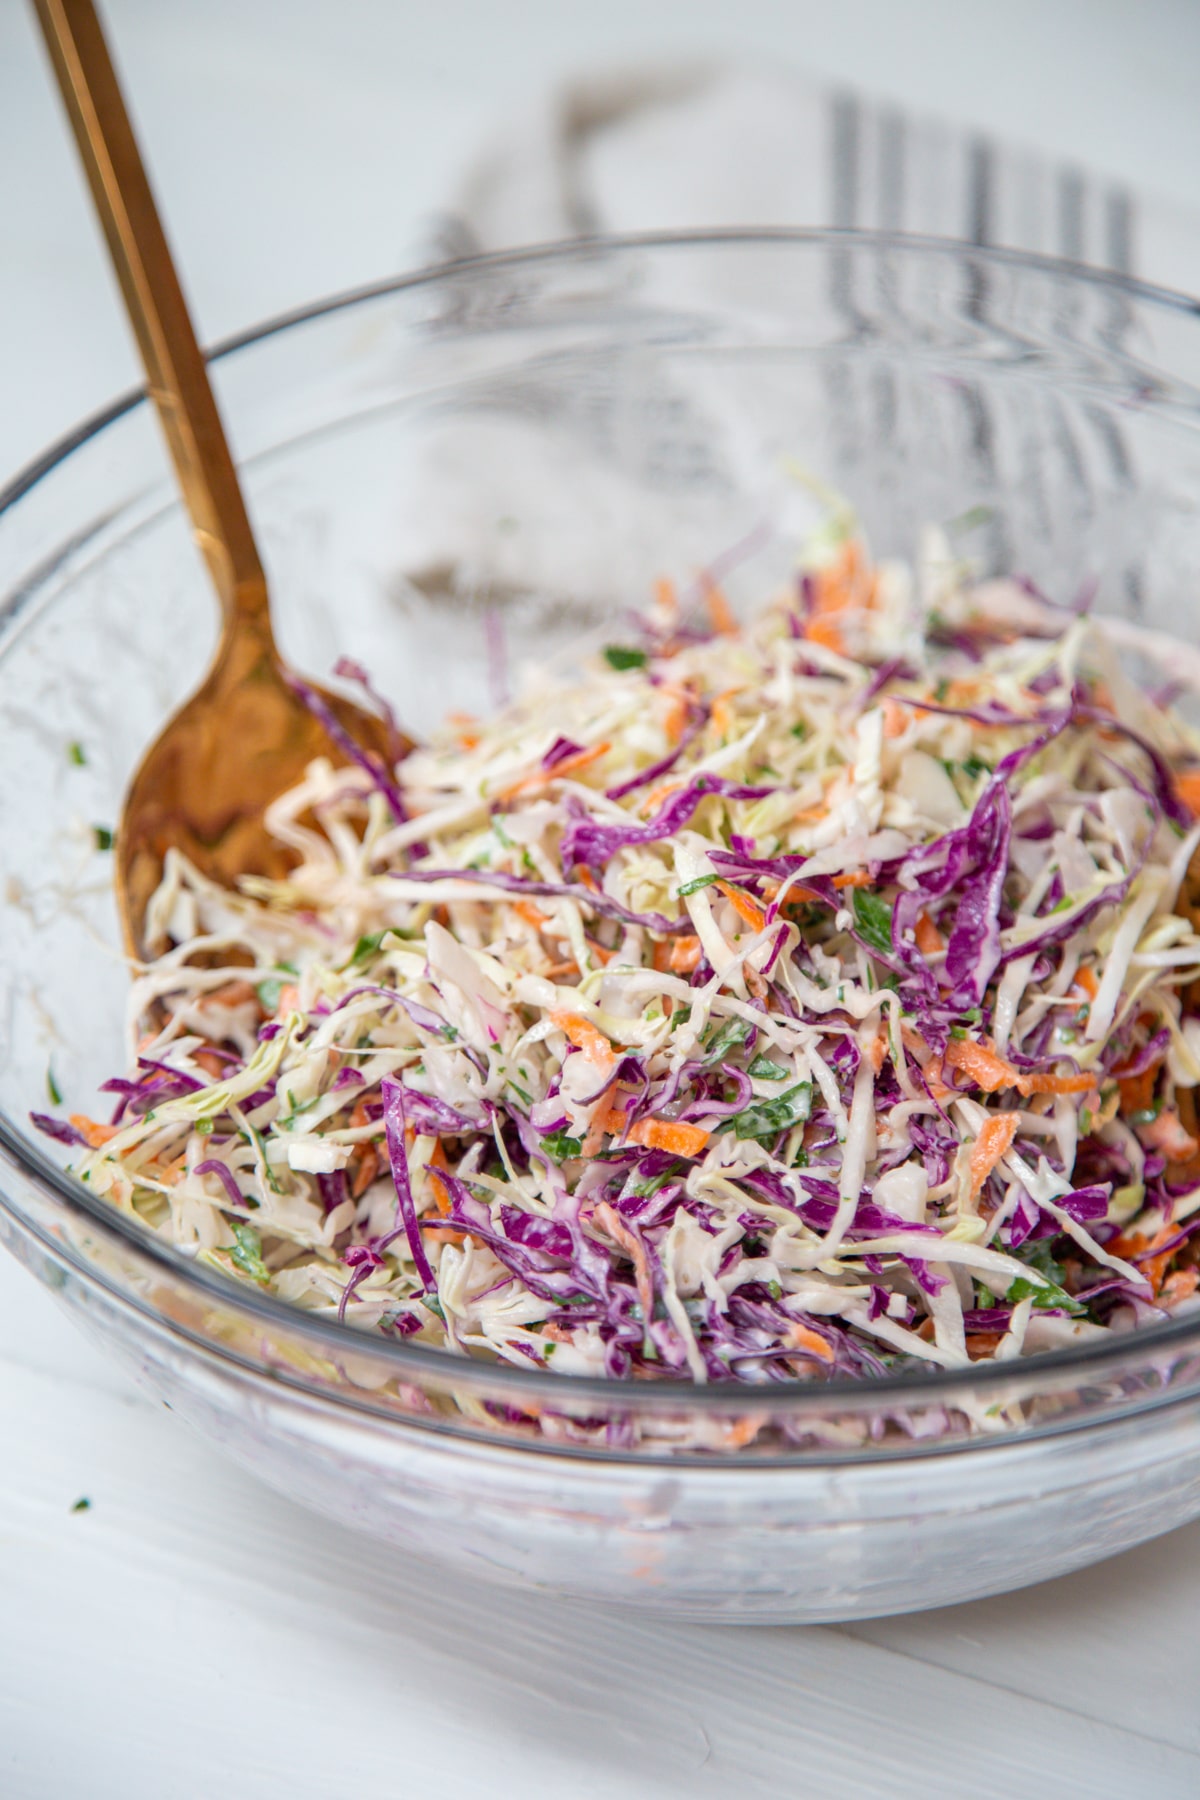 A clear glass bowl with creamy coleslaw with purple and green cabbage and carrots, and gold serving pieces in the bowl.